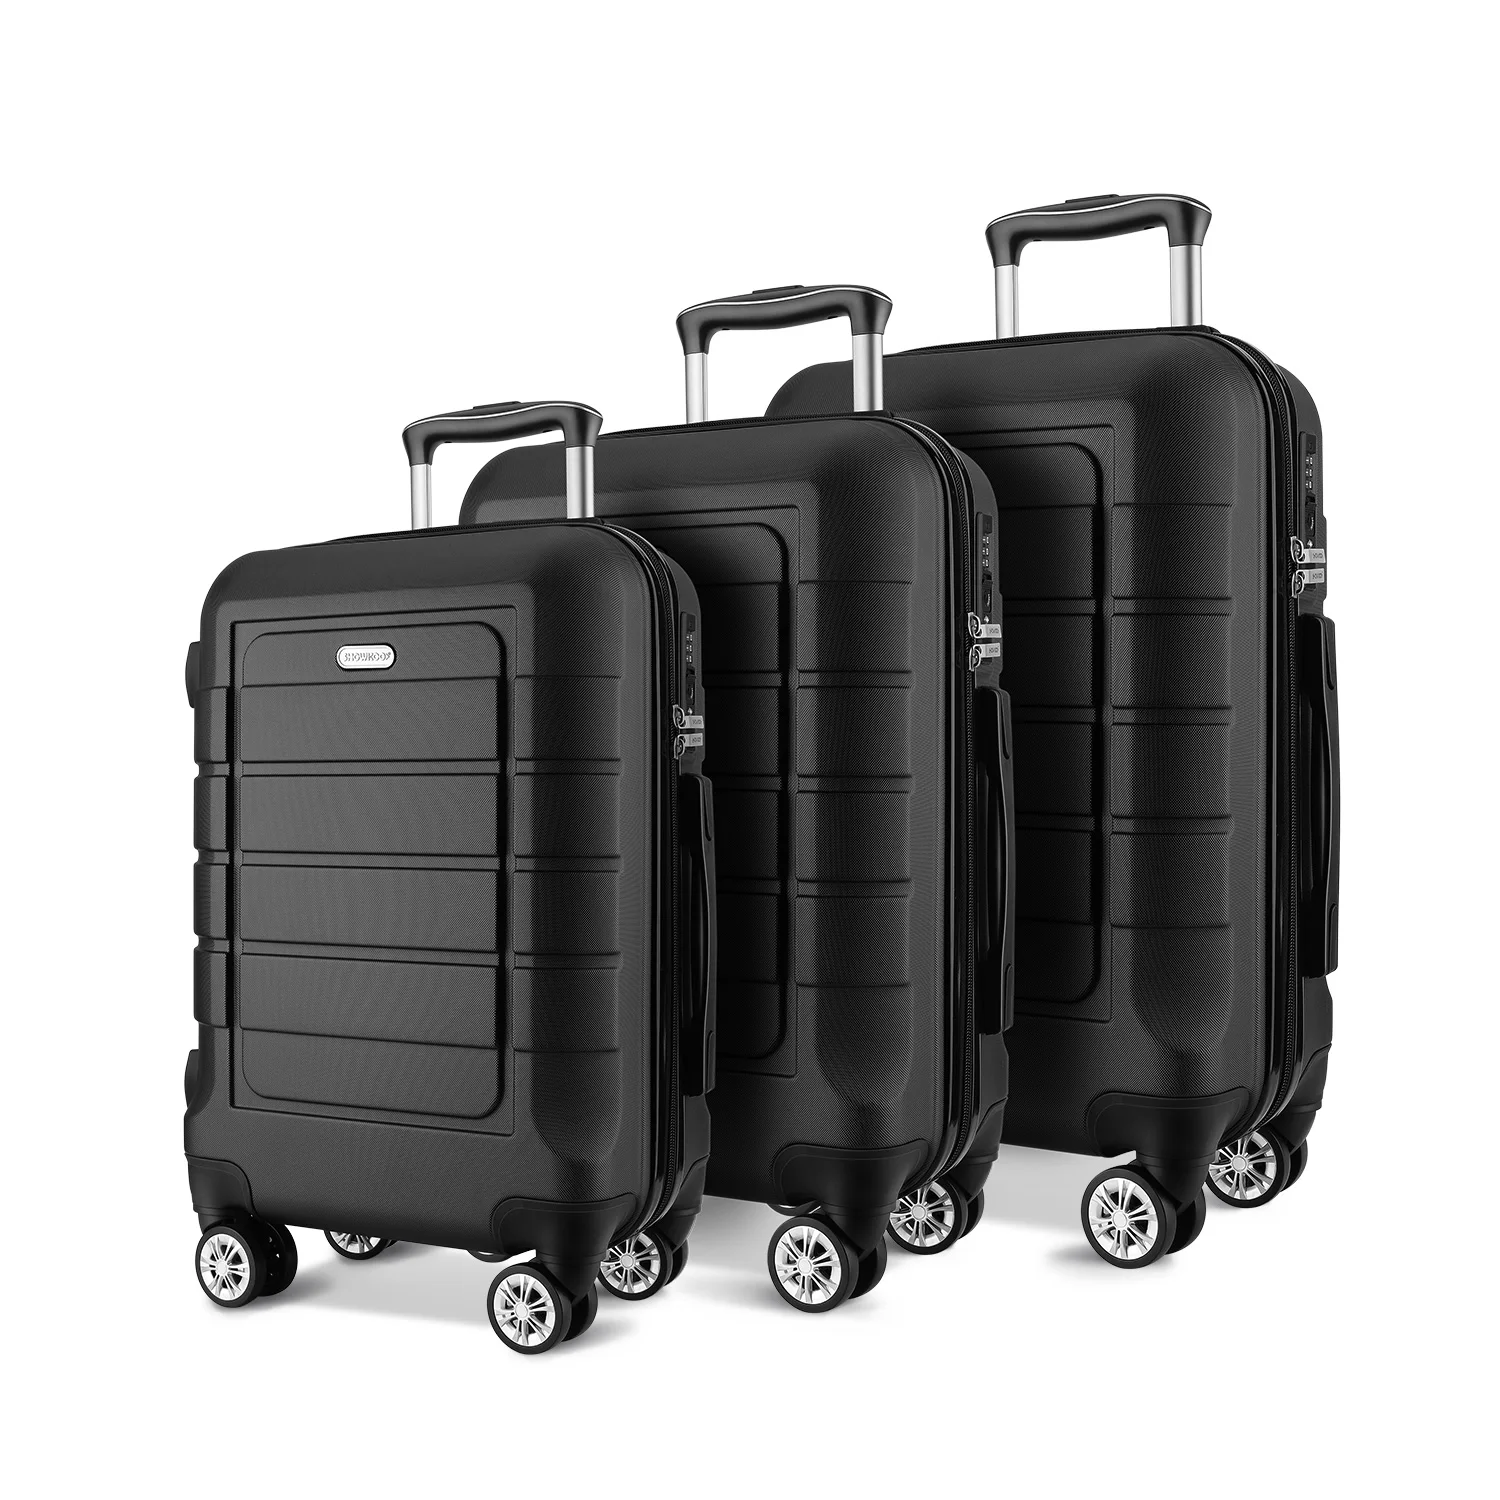 Abs 3 Piece Luggage Set Usb Charger Function Hard Shell Suitcase 